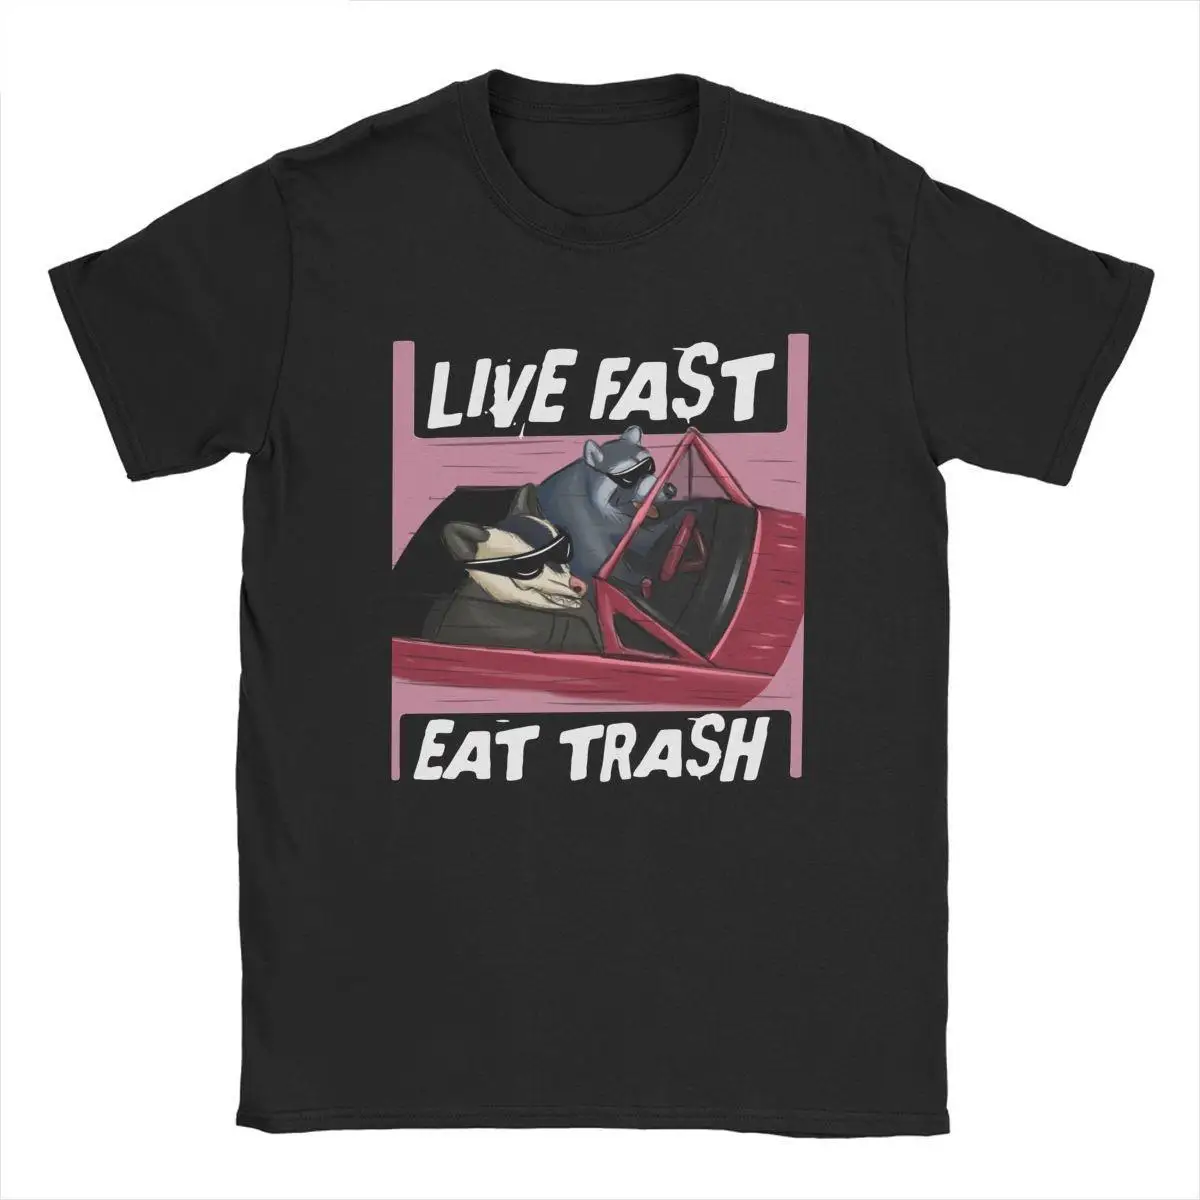 Casual Racoon Opossum Live Fast Eat Trash T-Shirts for Men Crew Neck 100% Cotton T Shirts Short Sleeve Tees Plus Size Tops